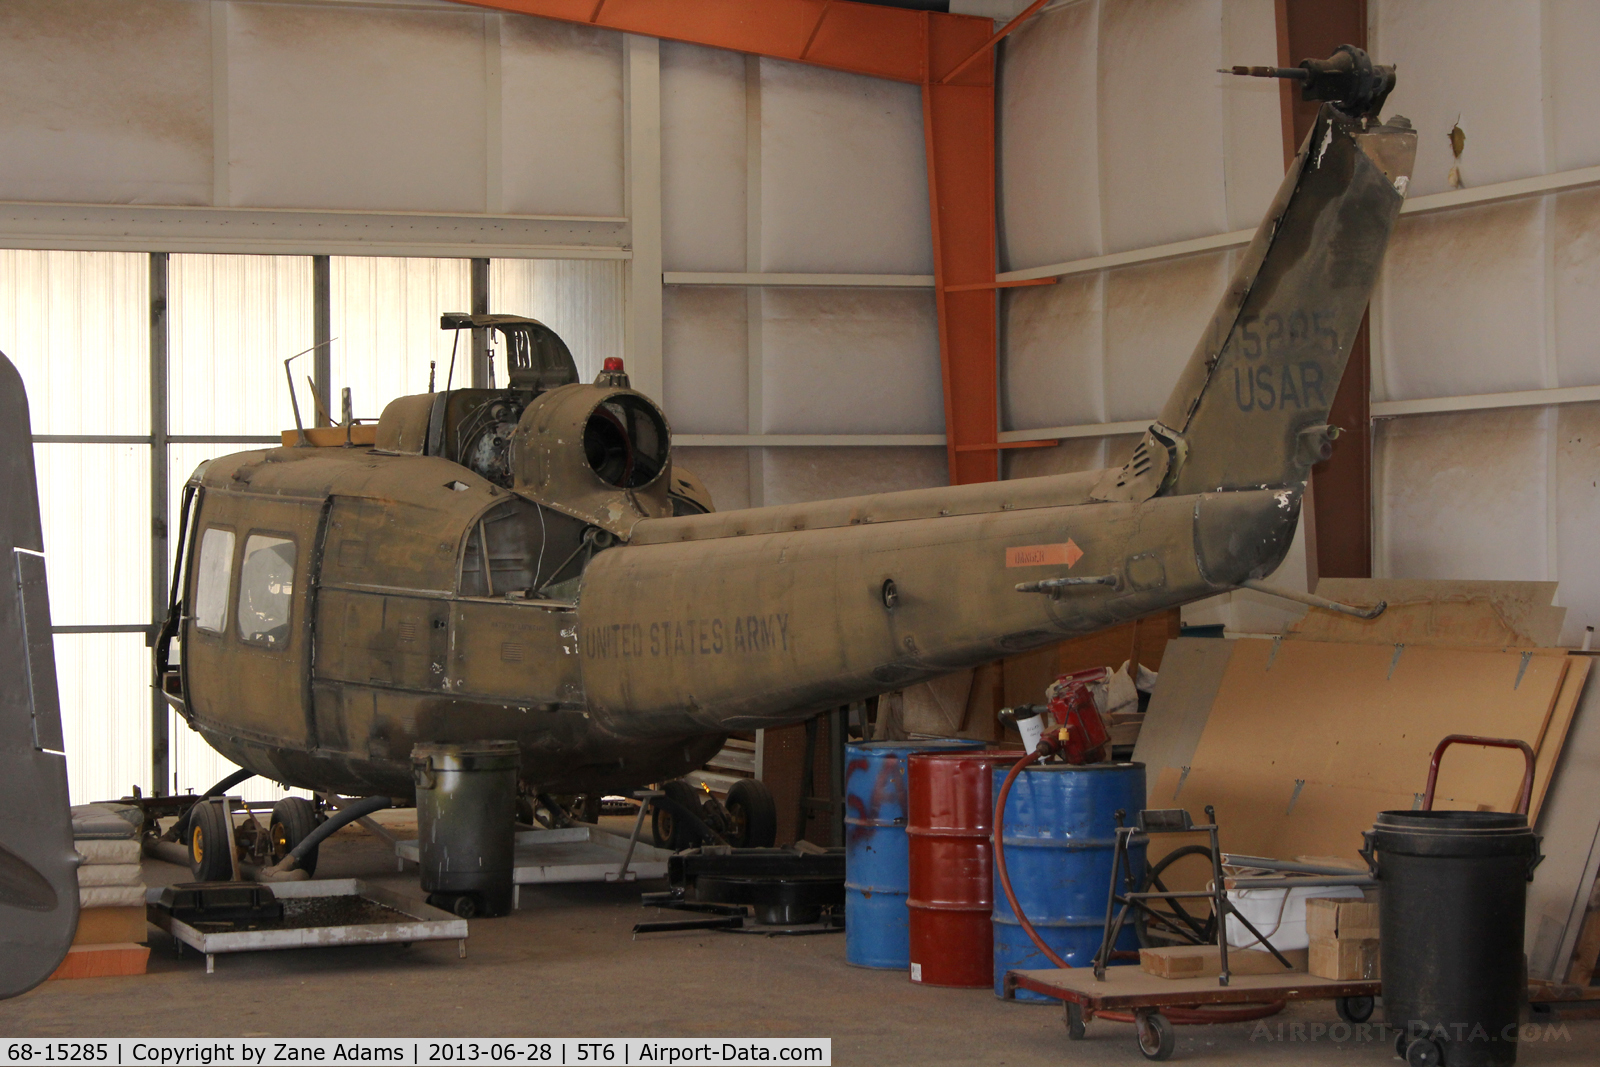 68-15285, 1968 Bell UH-1H Iroquois C/N 10215, Noted stored at the War Eagles Museum